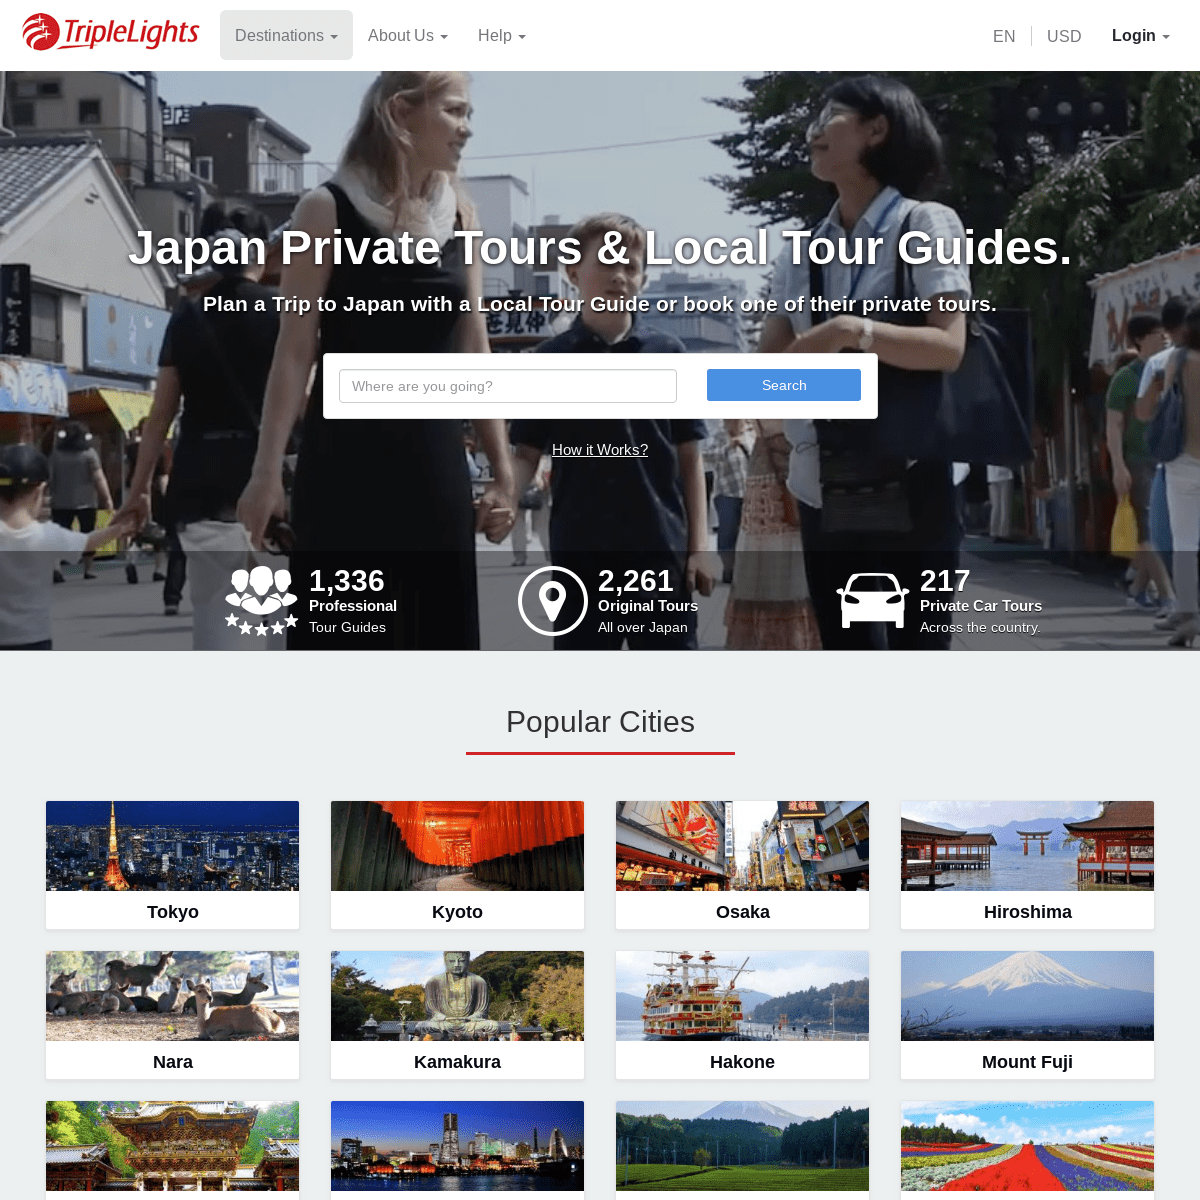 Japan Private Tours & Local Tour Guides | TripleLights